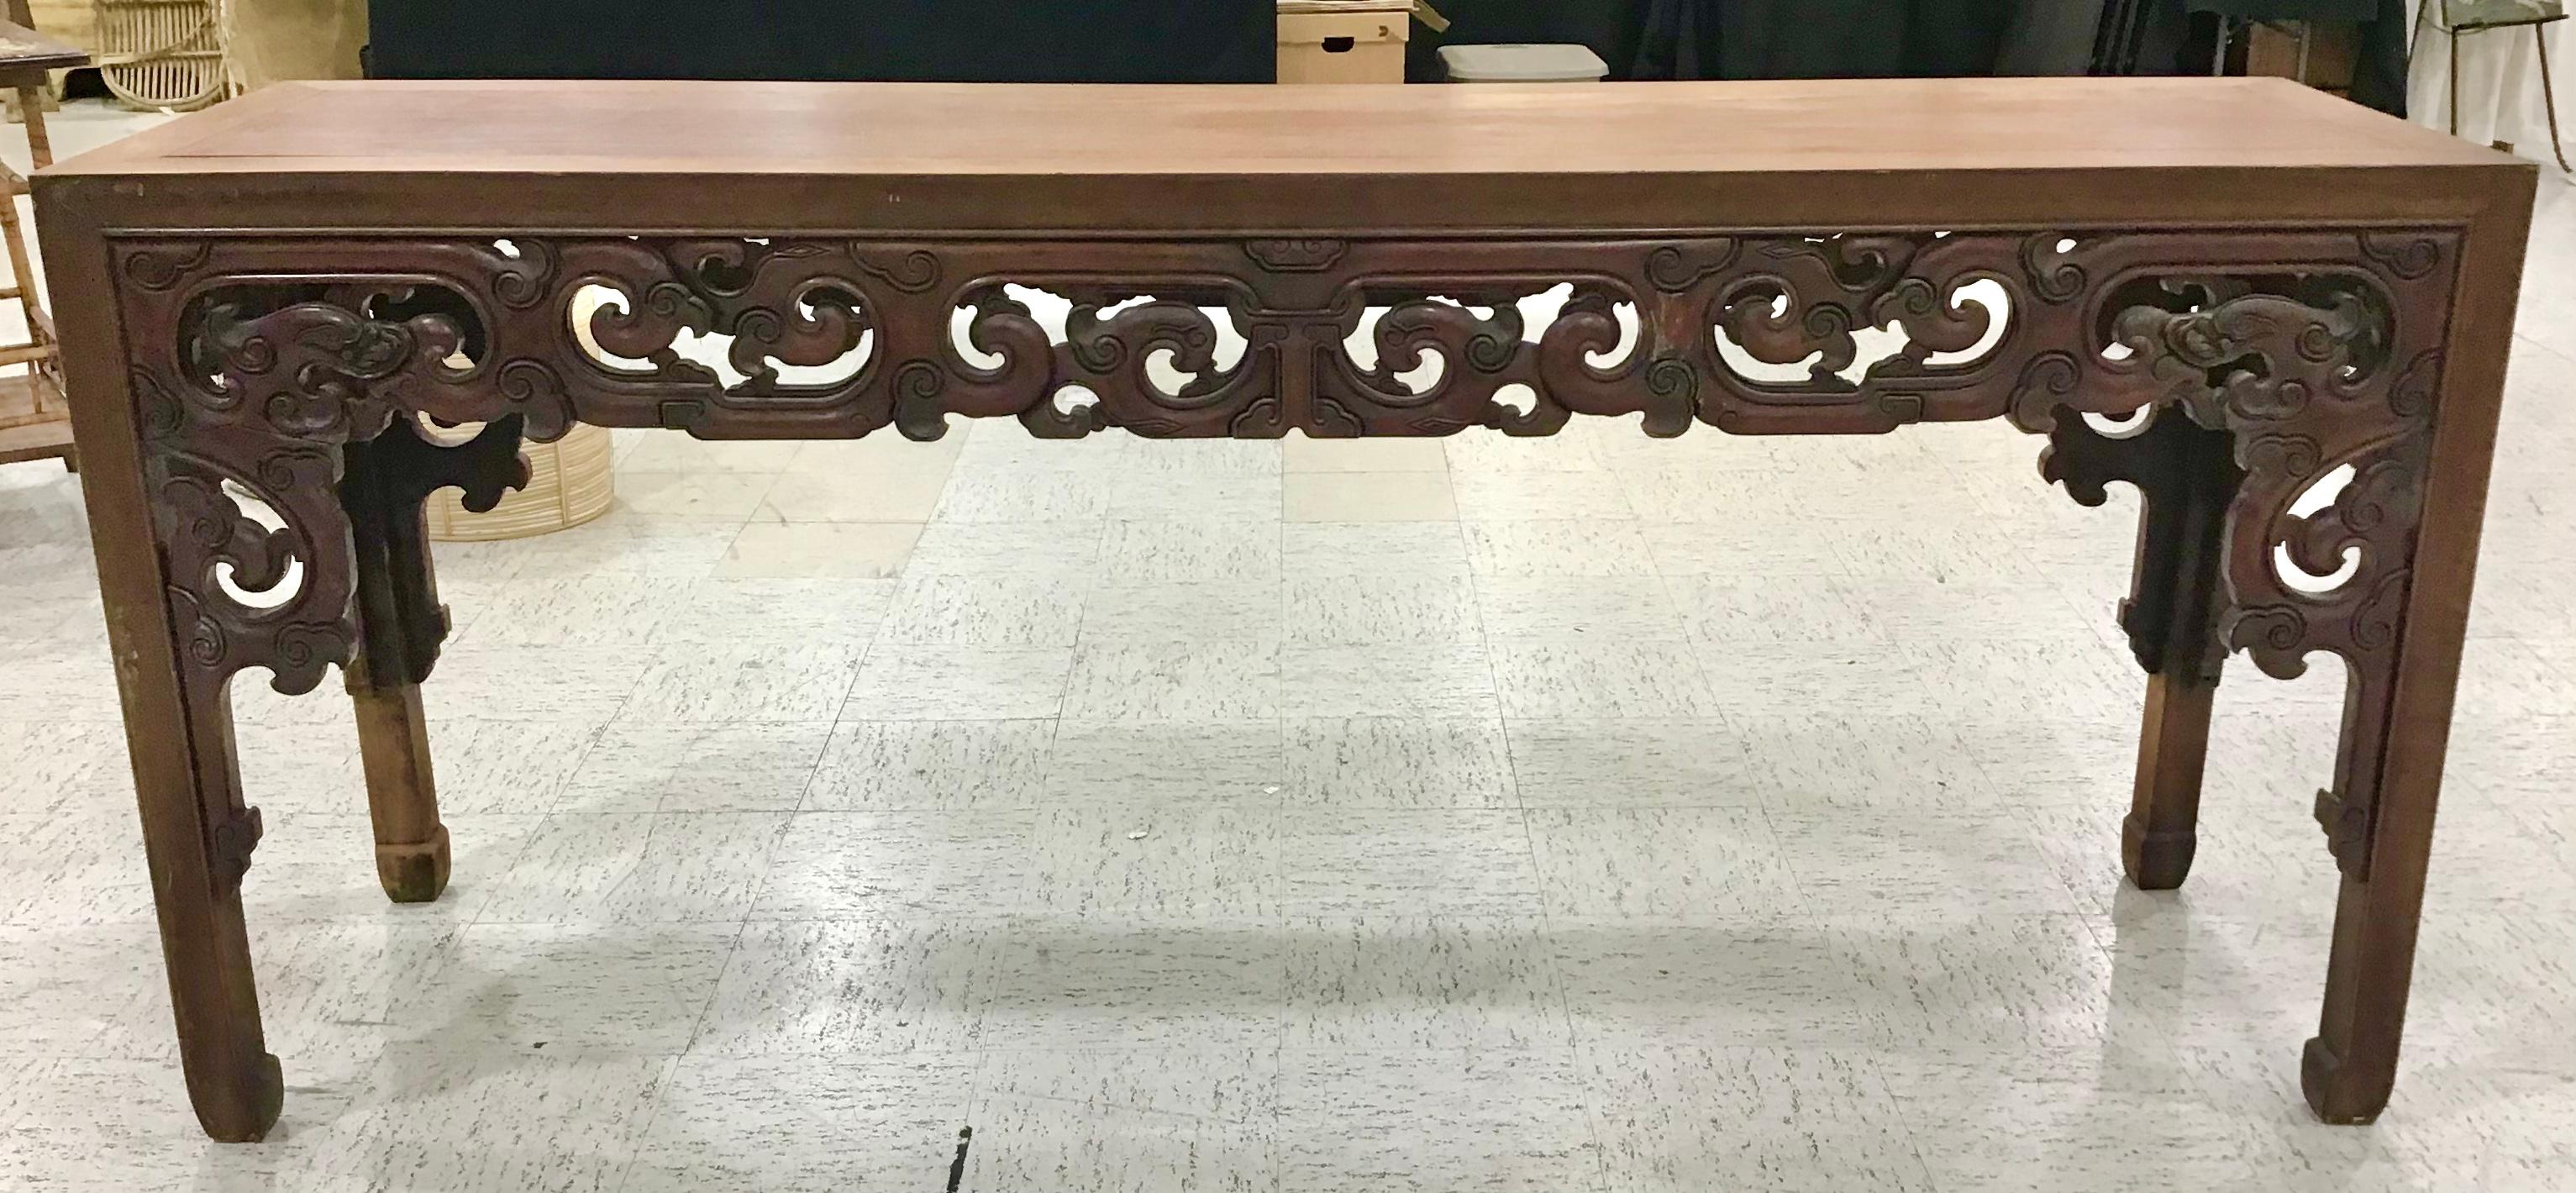 Chinese altar / console table, stunning pierced carved design on each all around. Carved Chinese symbols & Dragons on all four sides symbolic of strength. Its classical proportion gives an air of lightness yet its structured perfectly, strong and